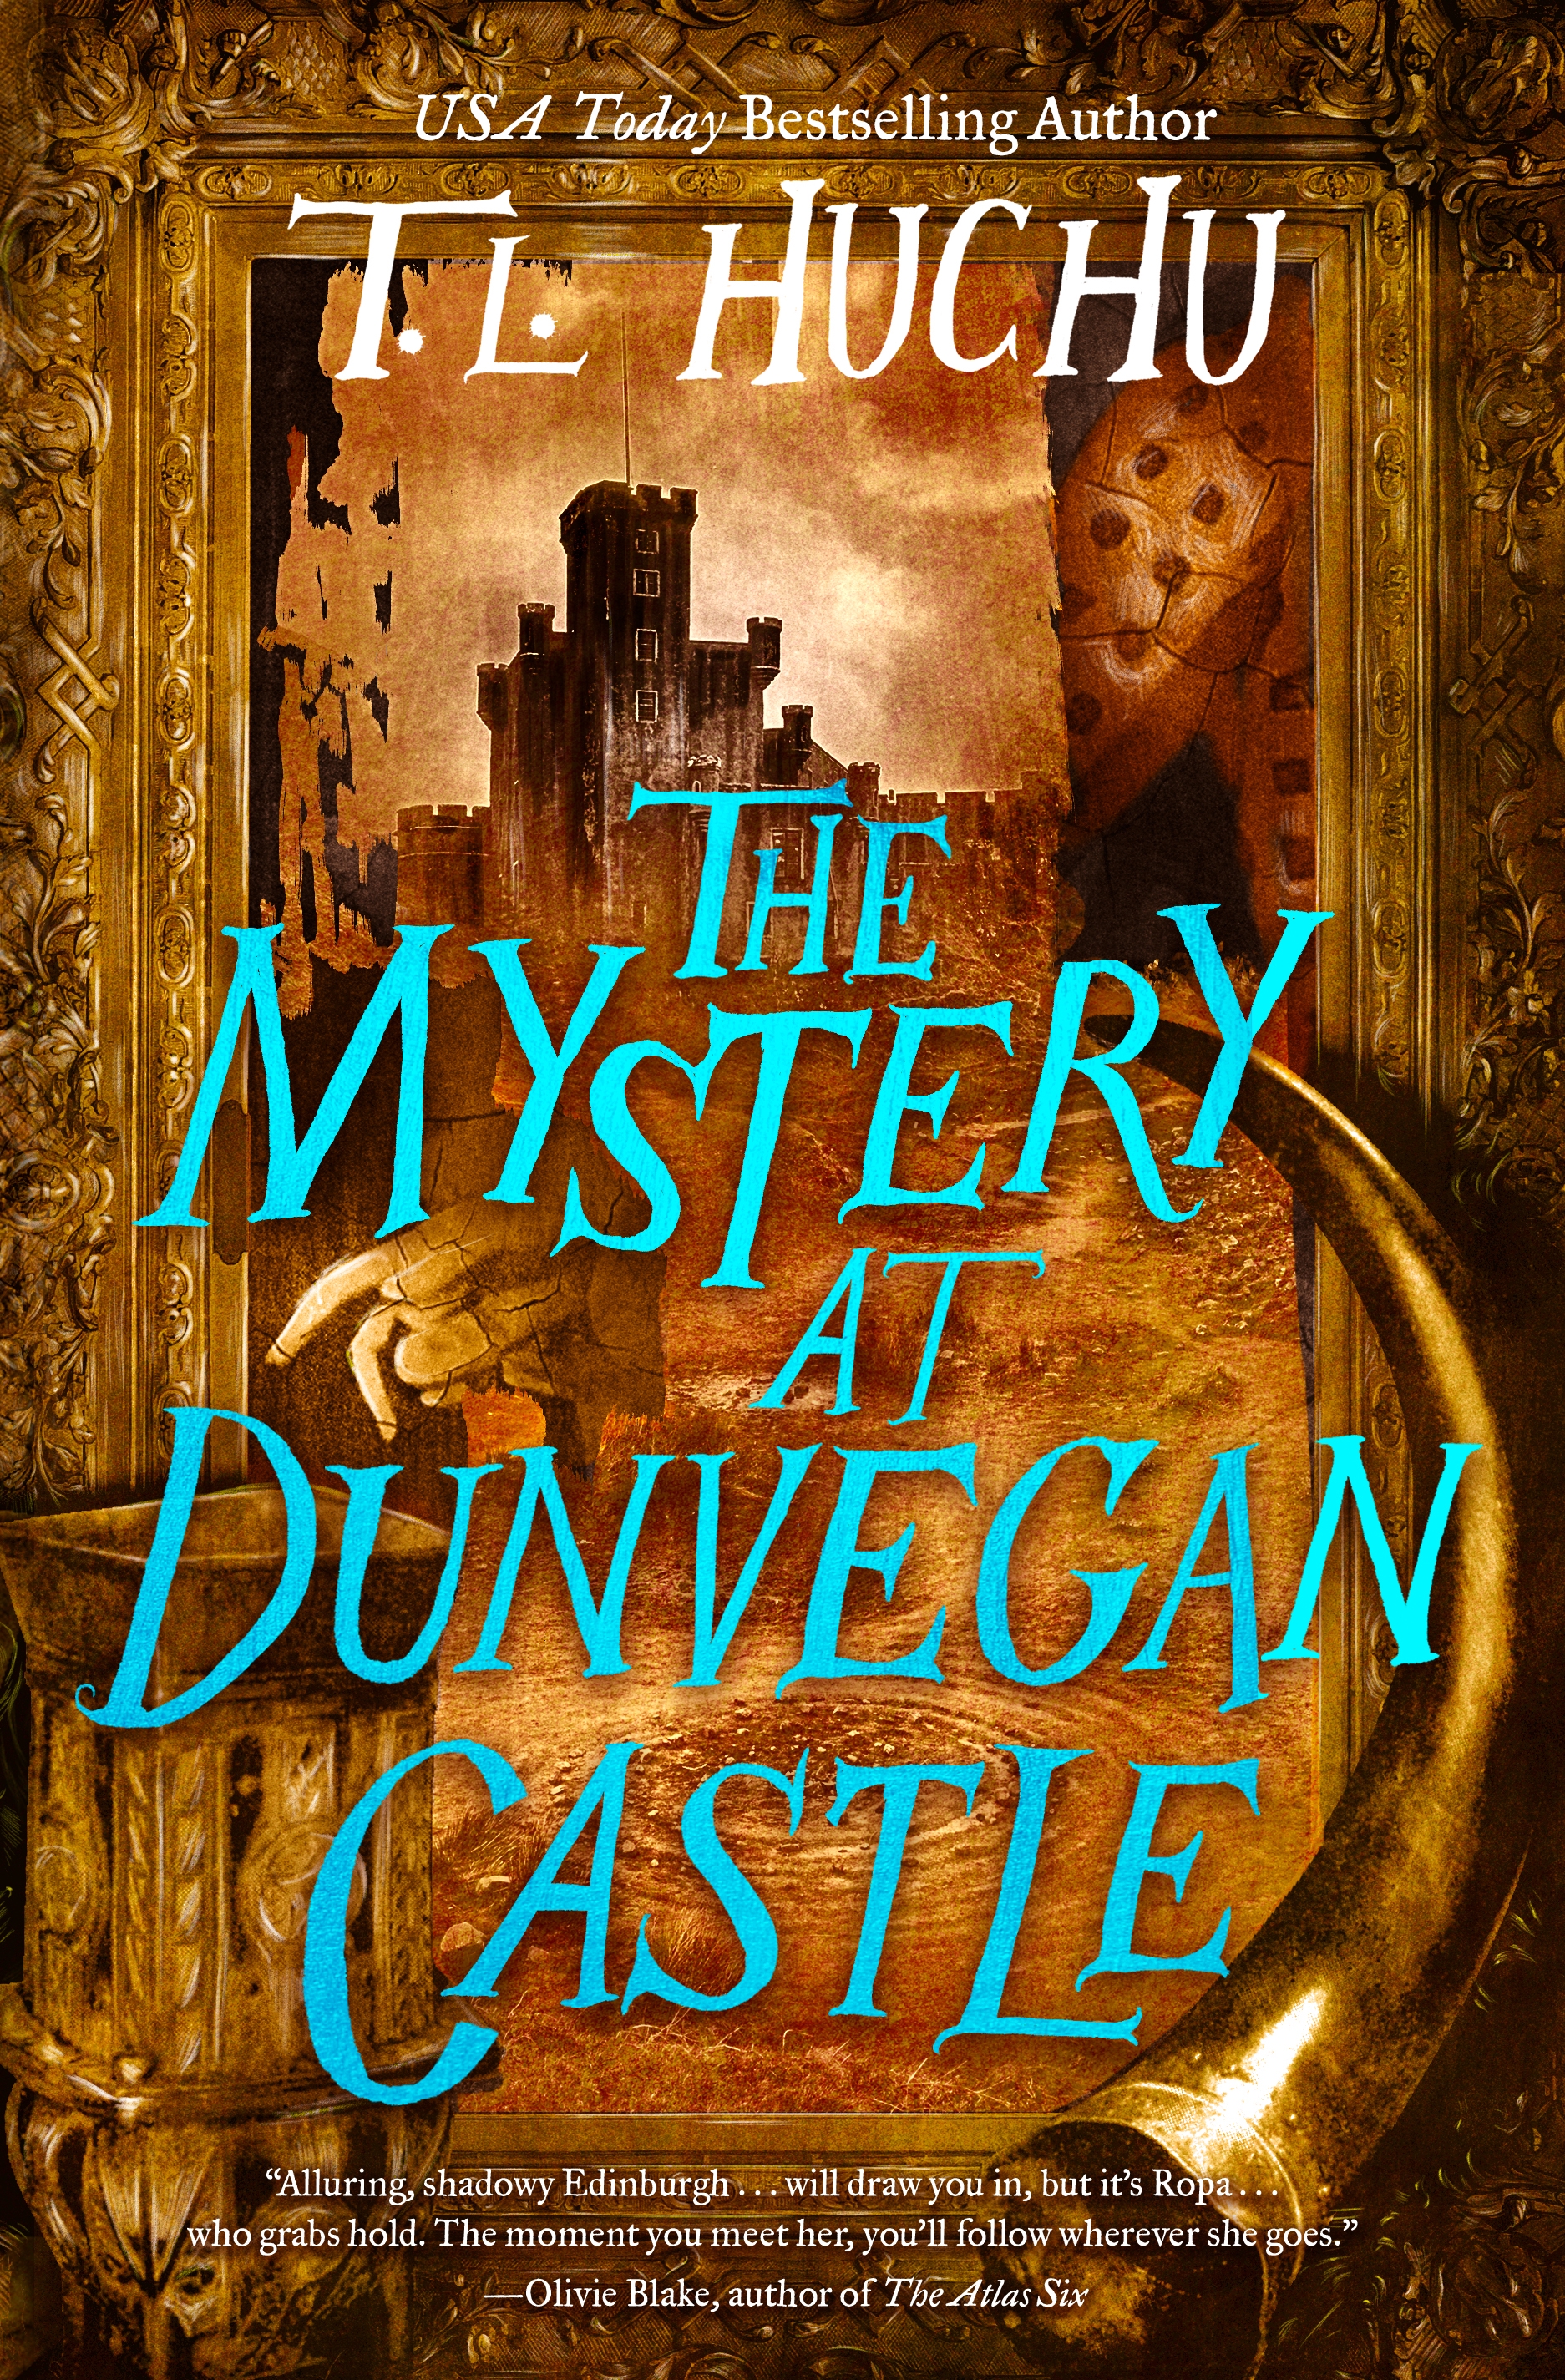 The Mystery at Dunvegan Castle by T. L. Huchu